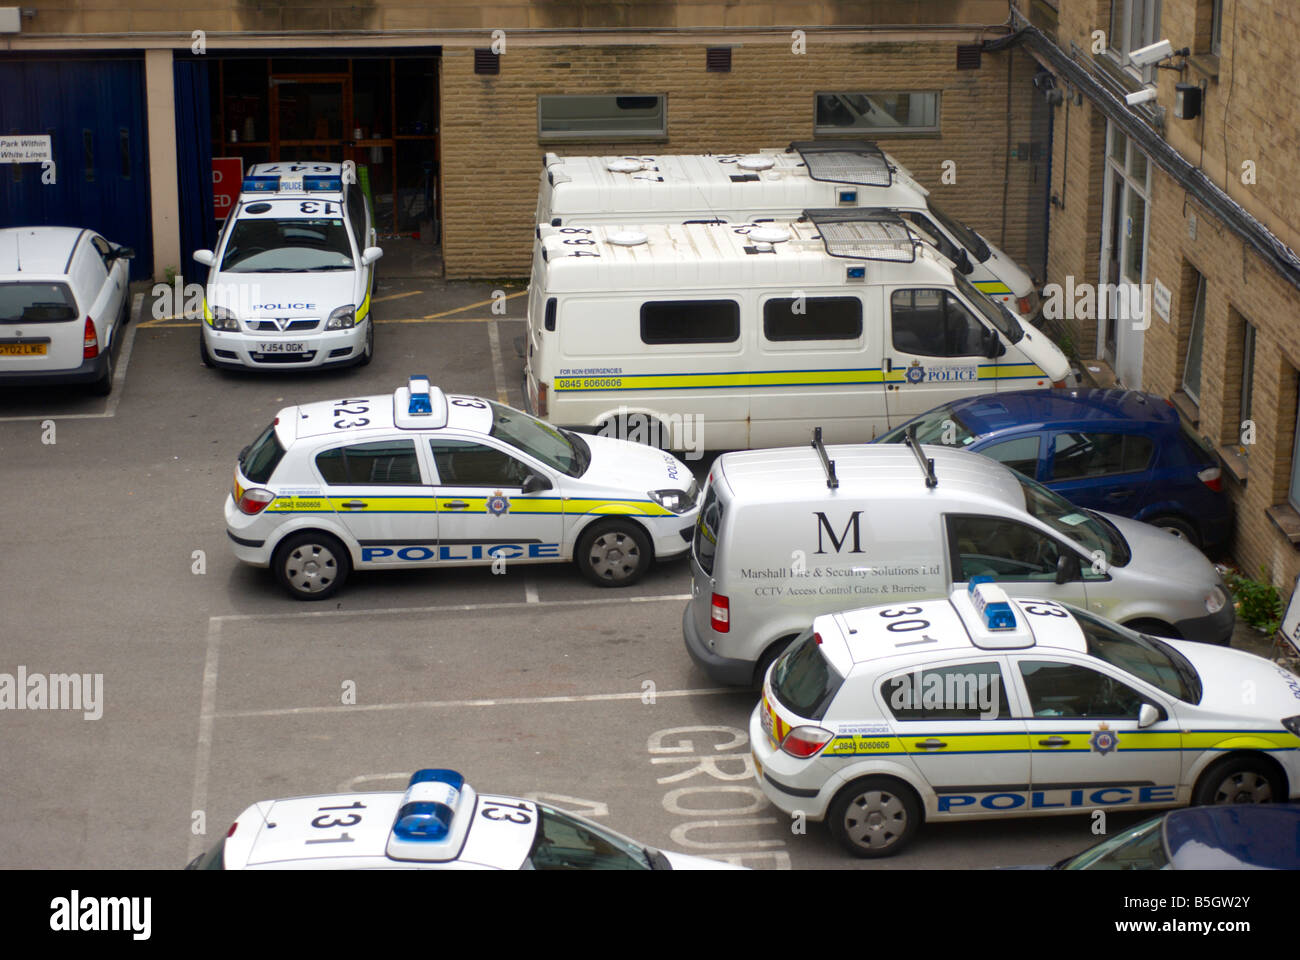 Police cars in a West Yorkshire police station car park Stock Photo